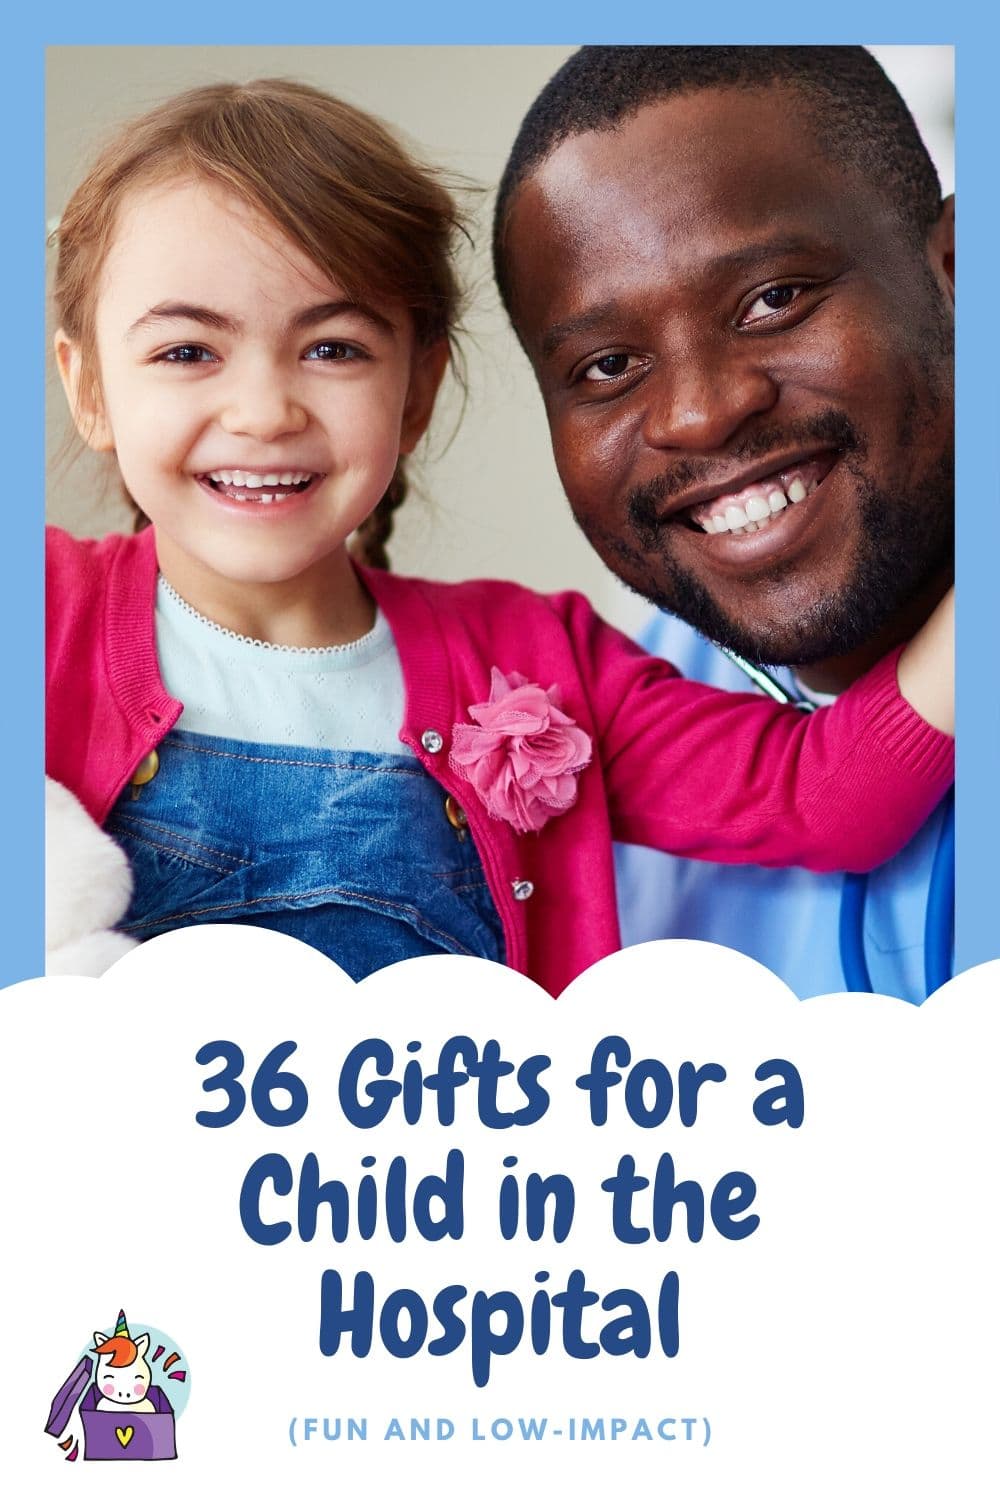 36 Gifts for a Child in the Hospital (Fun and Low-Impact) - pinterest pin image